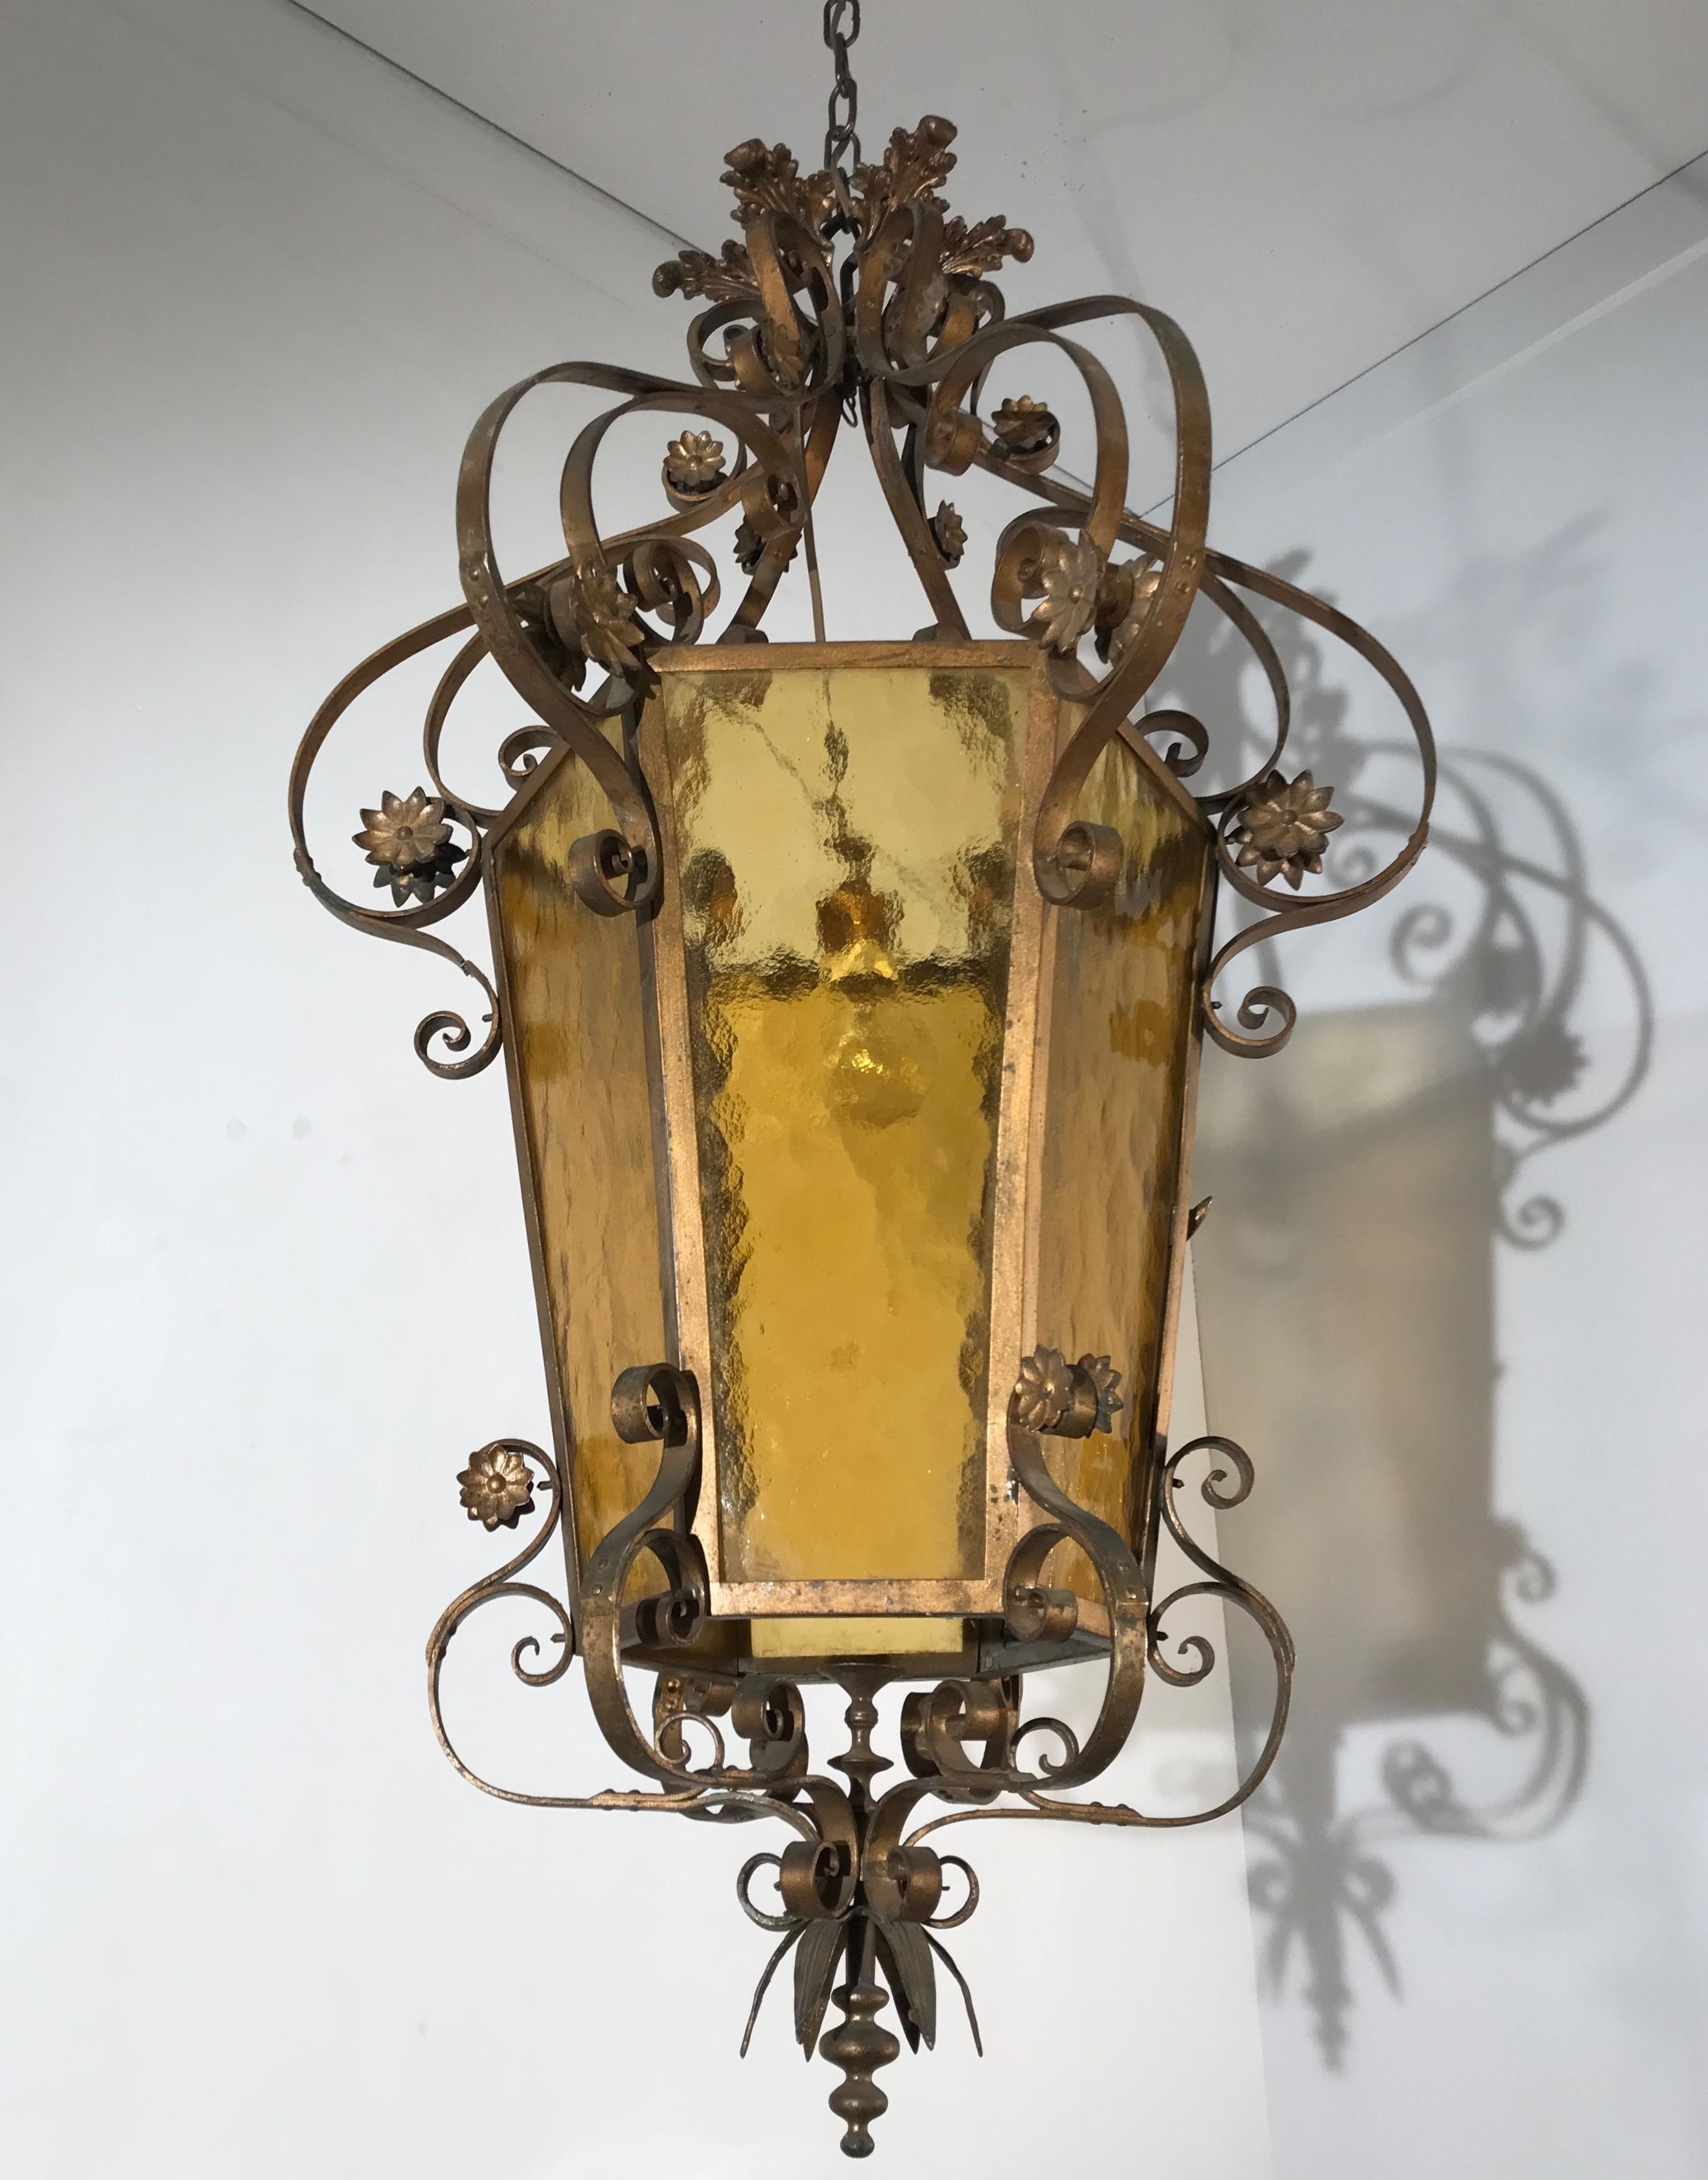 Hand-Crafted Rare Large Arts & Crafts Brass and Colored Glass Hexagonal Lantern or Chandelier